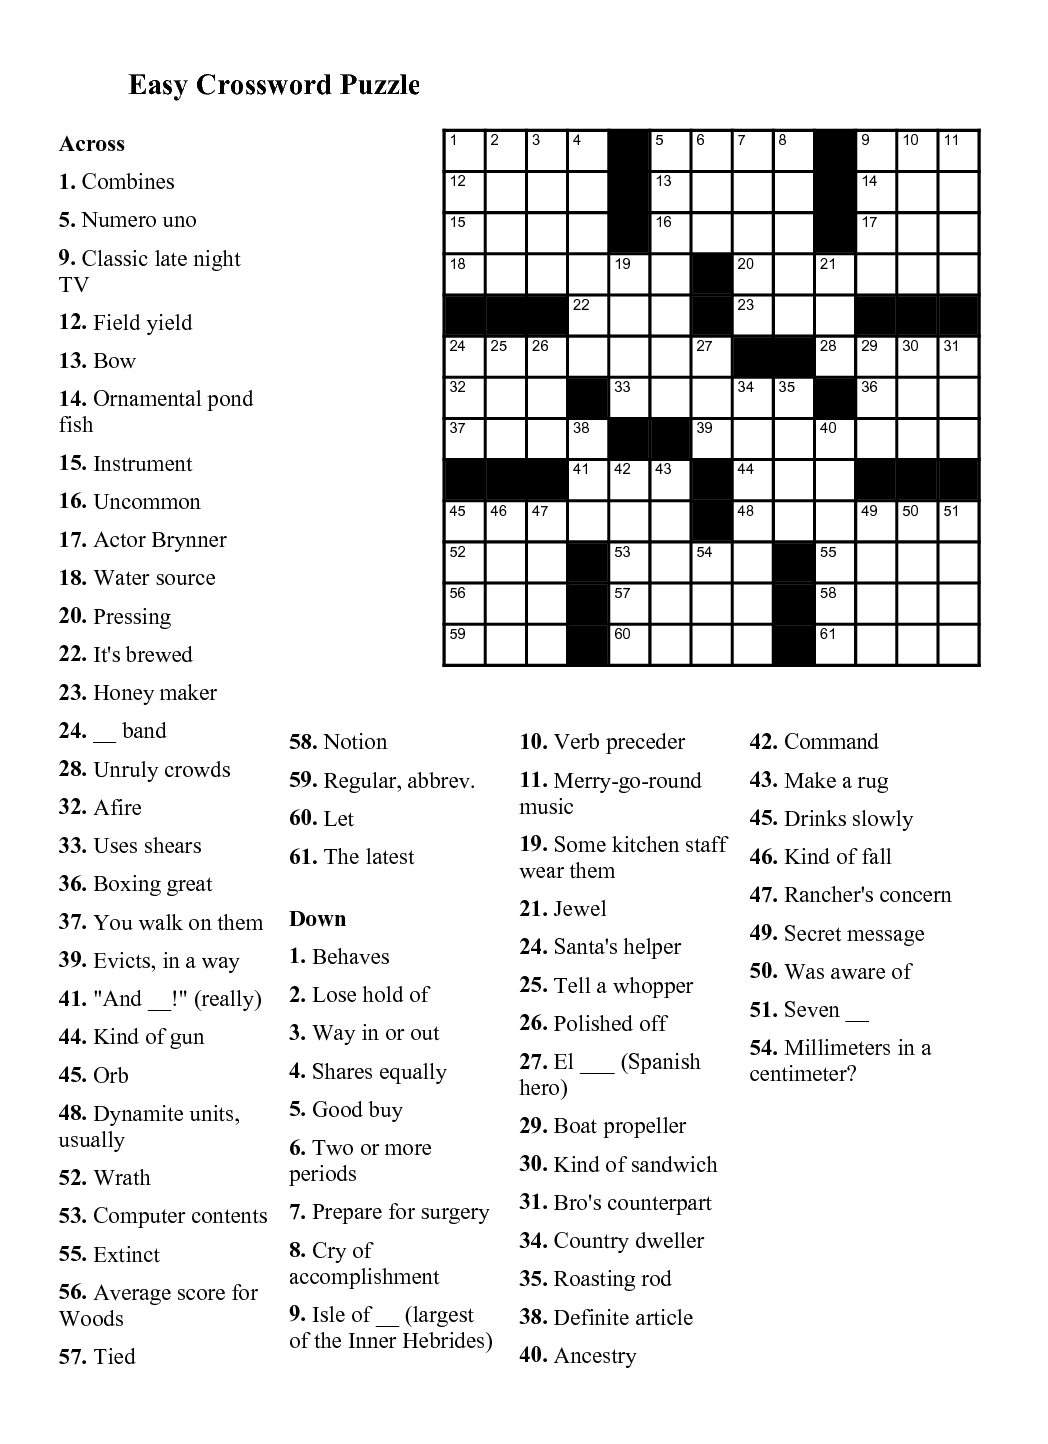 Easy Crossword Puzzles Printable Daily